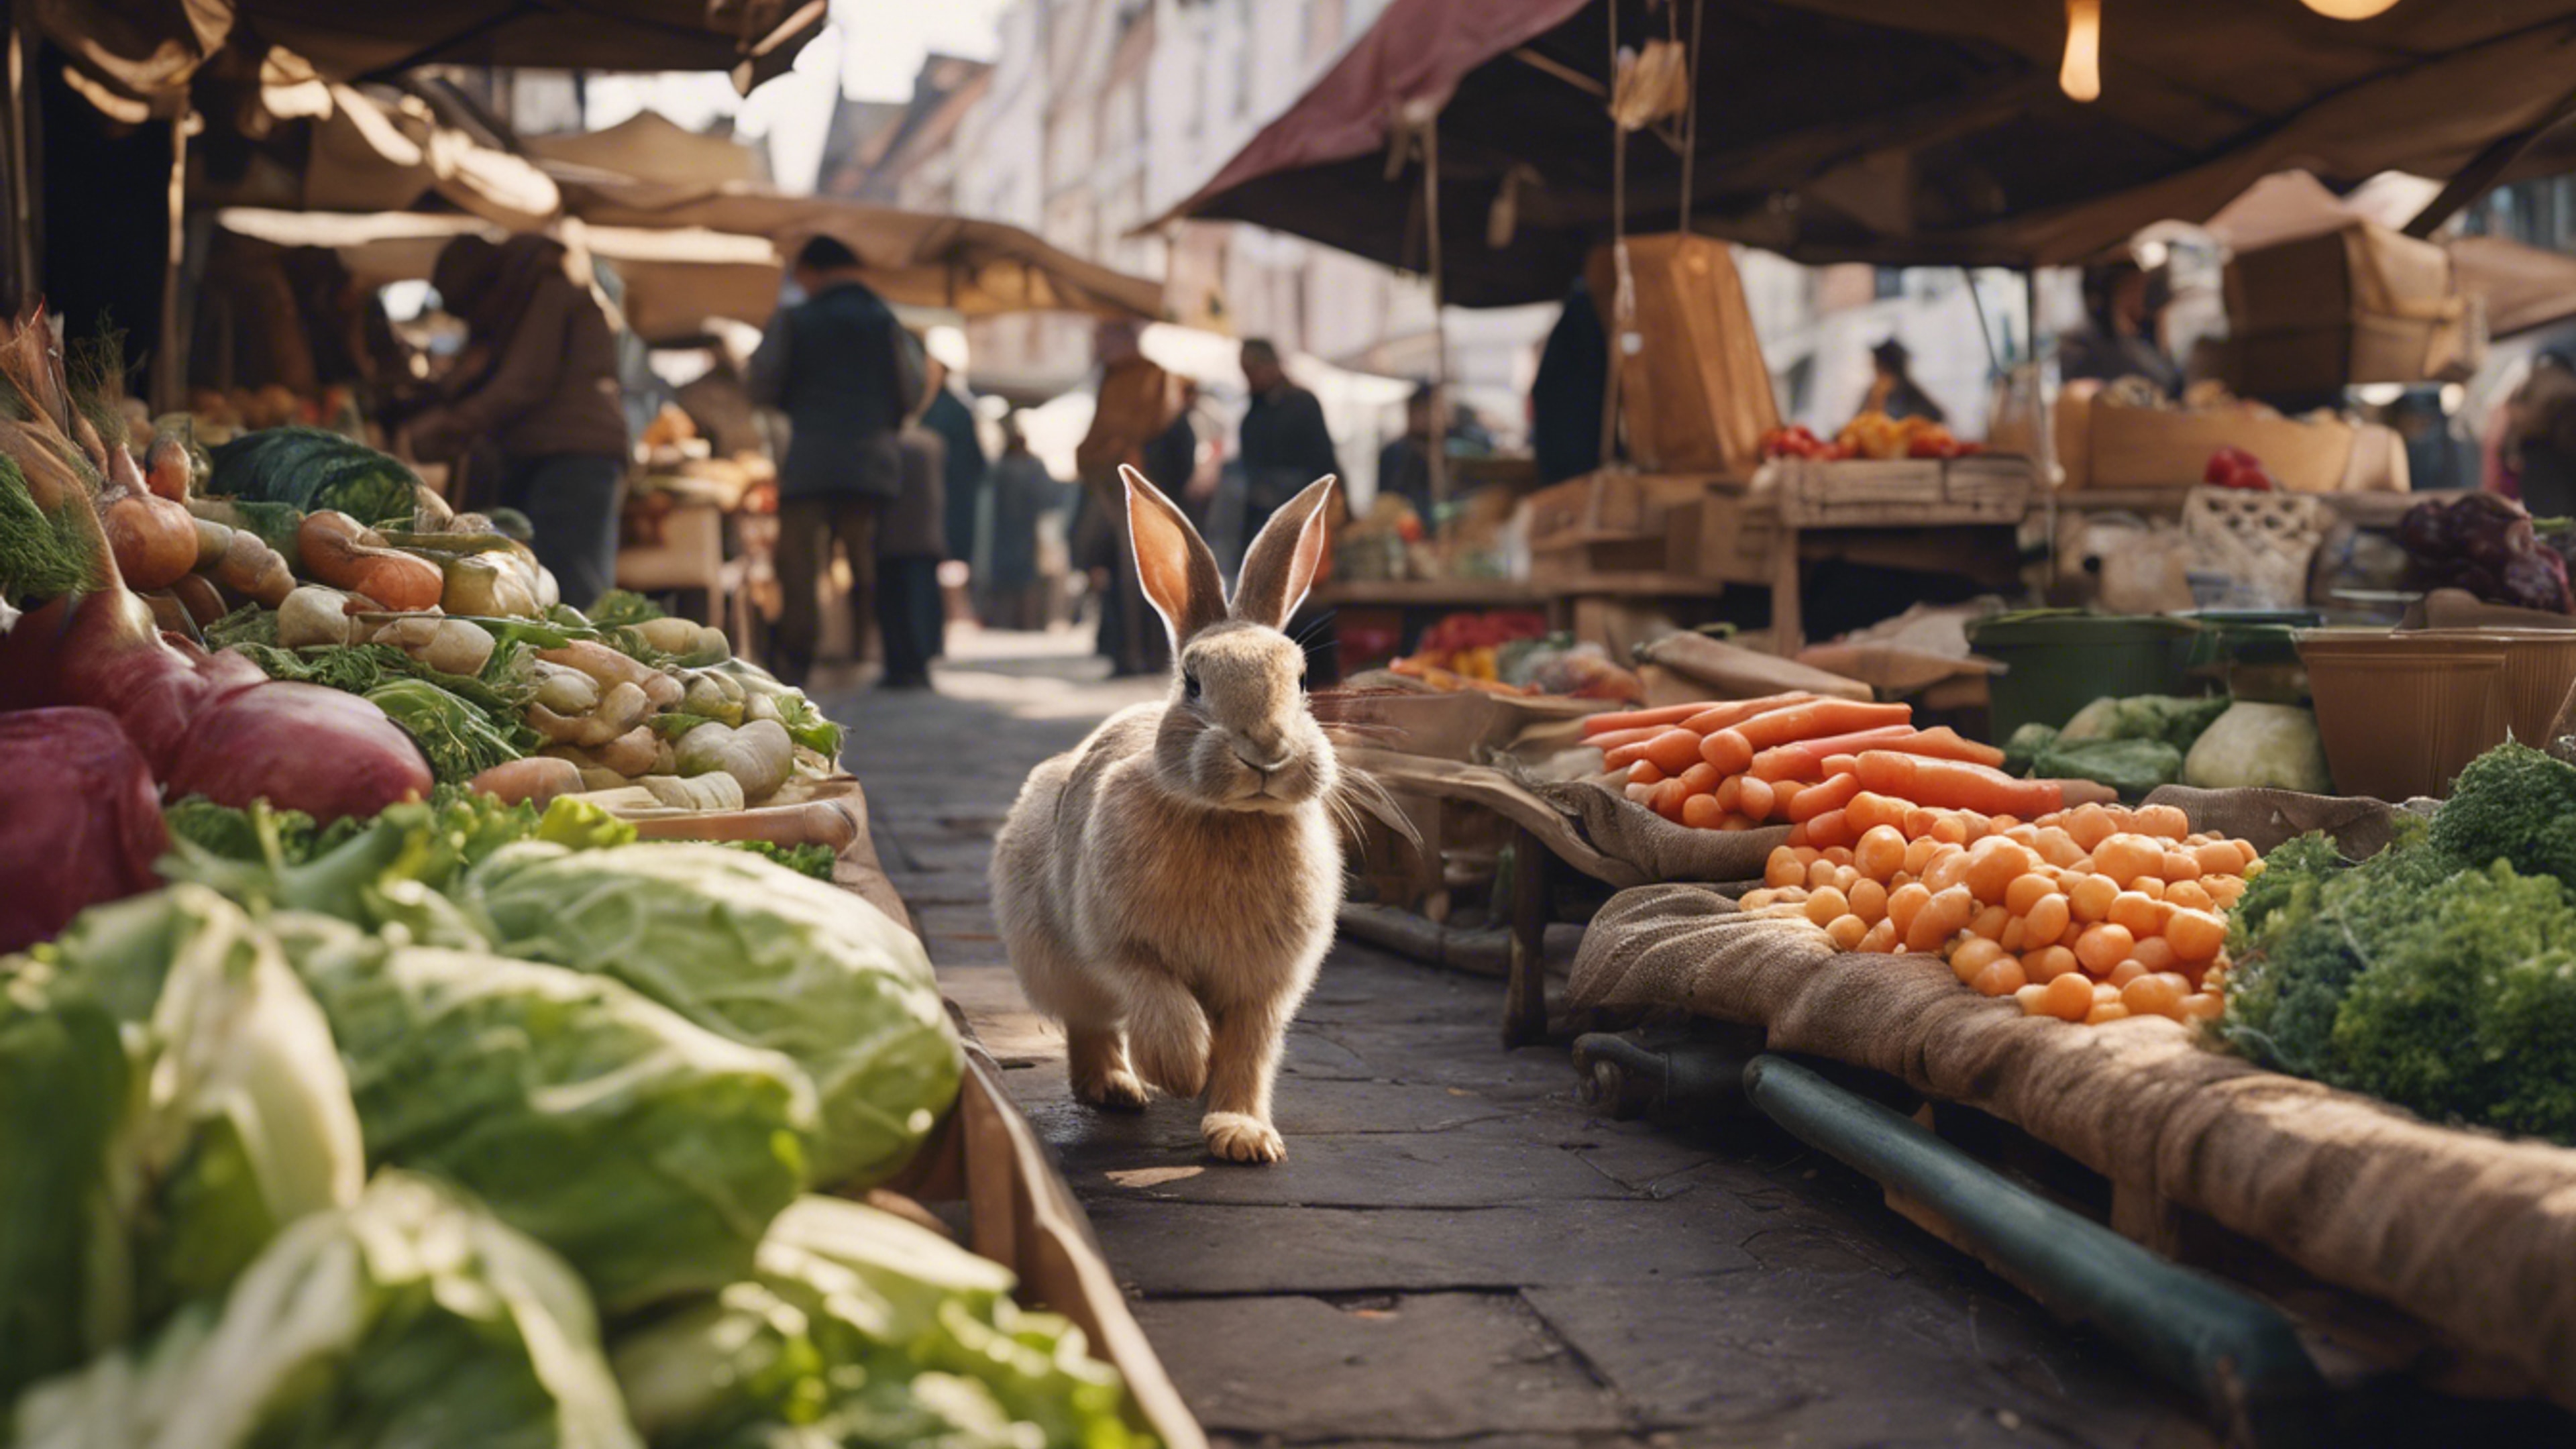 A rabbit running a vegetable stall in an old-fashioned market. Tapet[95b88699917c48c6bf62]